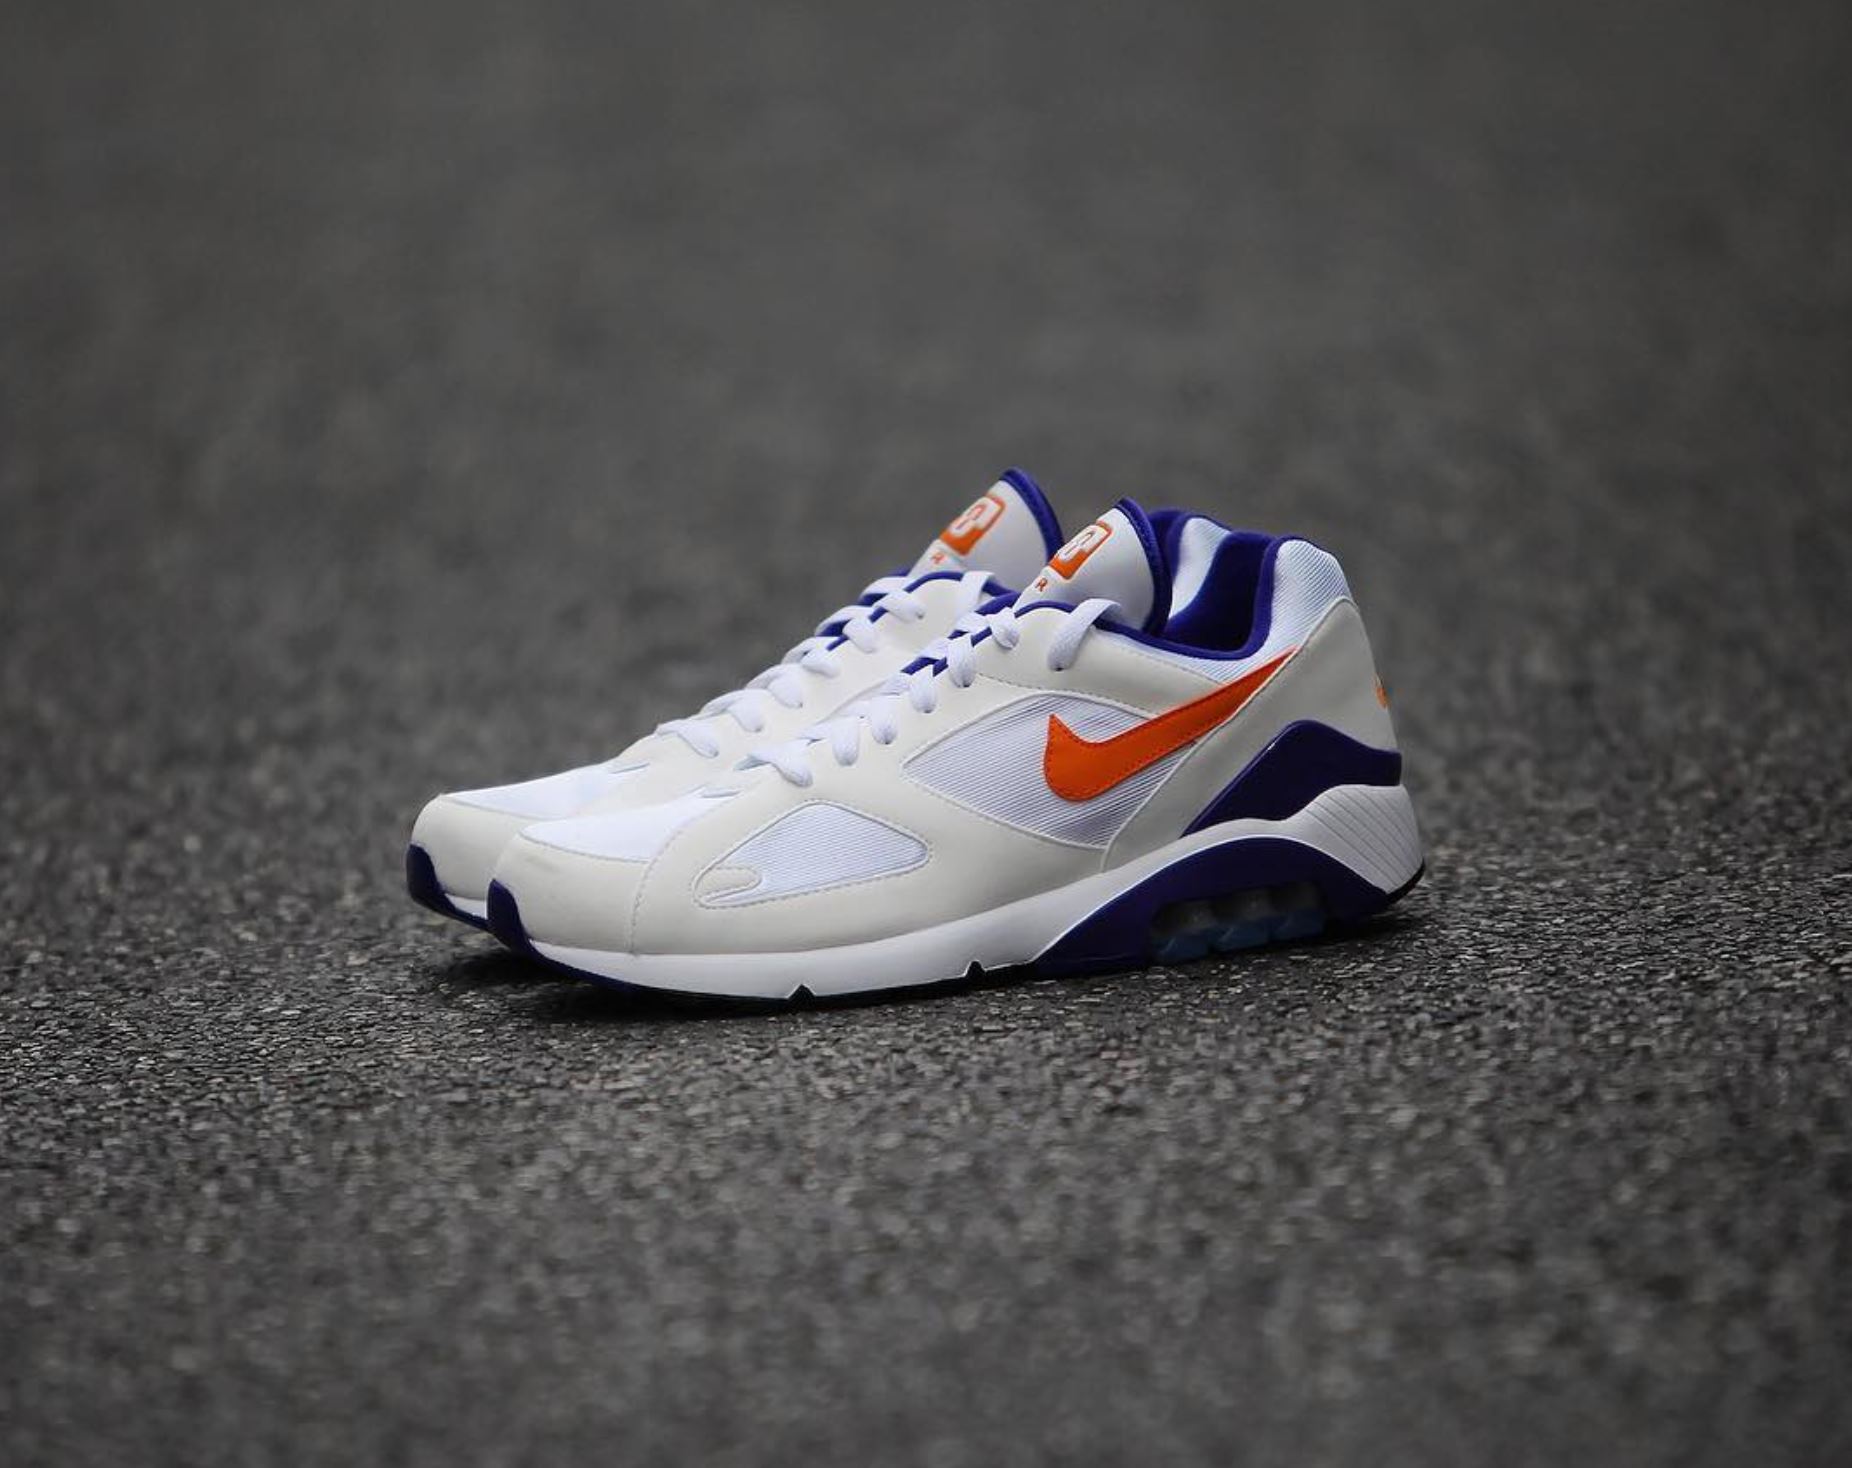 Here's a Detailed Look at the Nike Air Max 180 Dropping Tomorrow